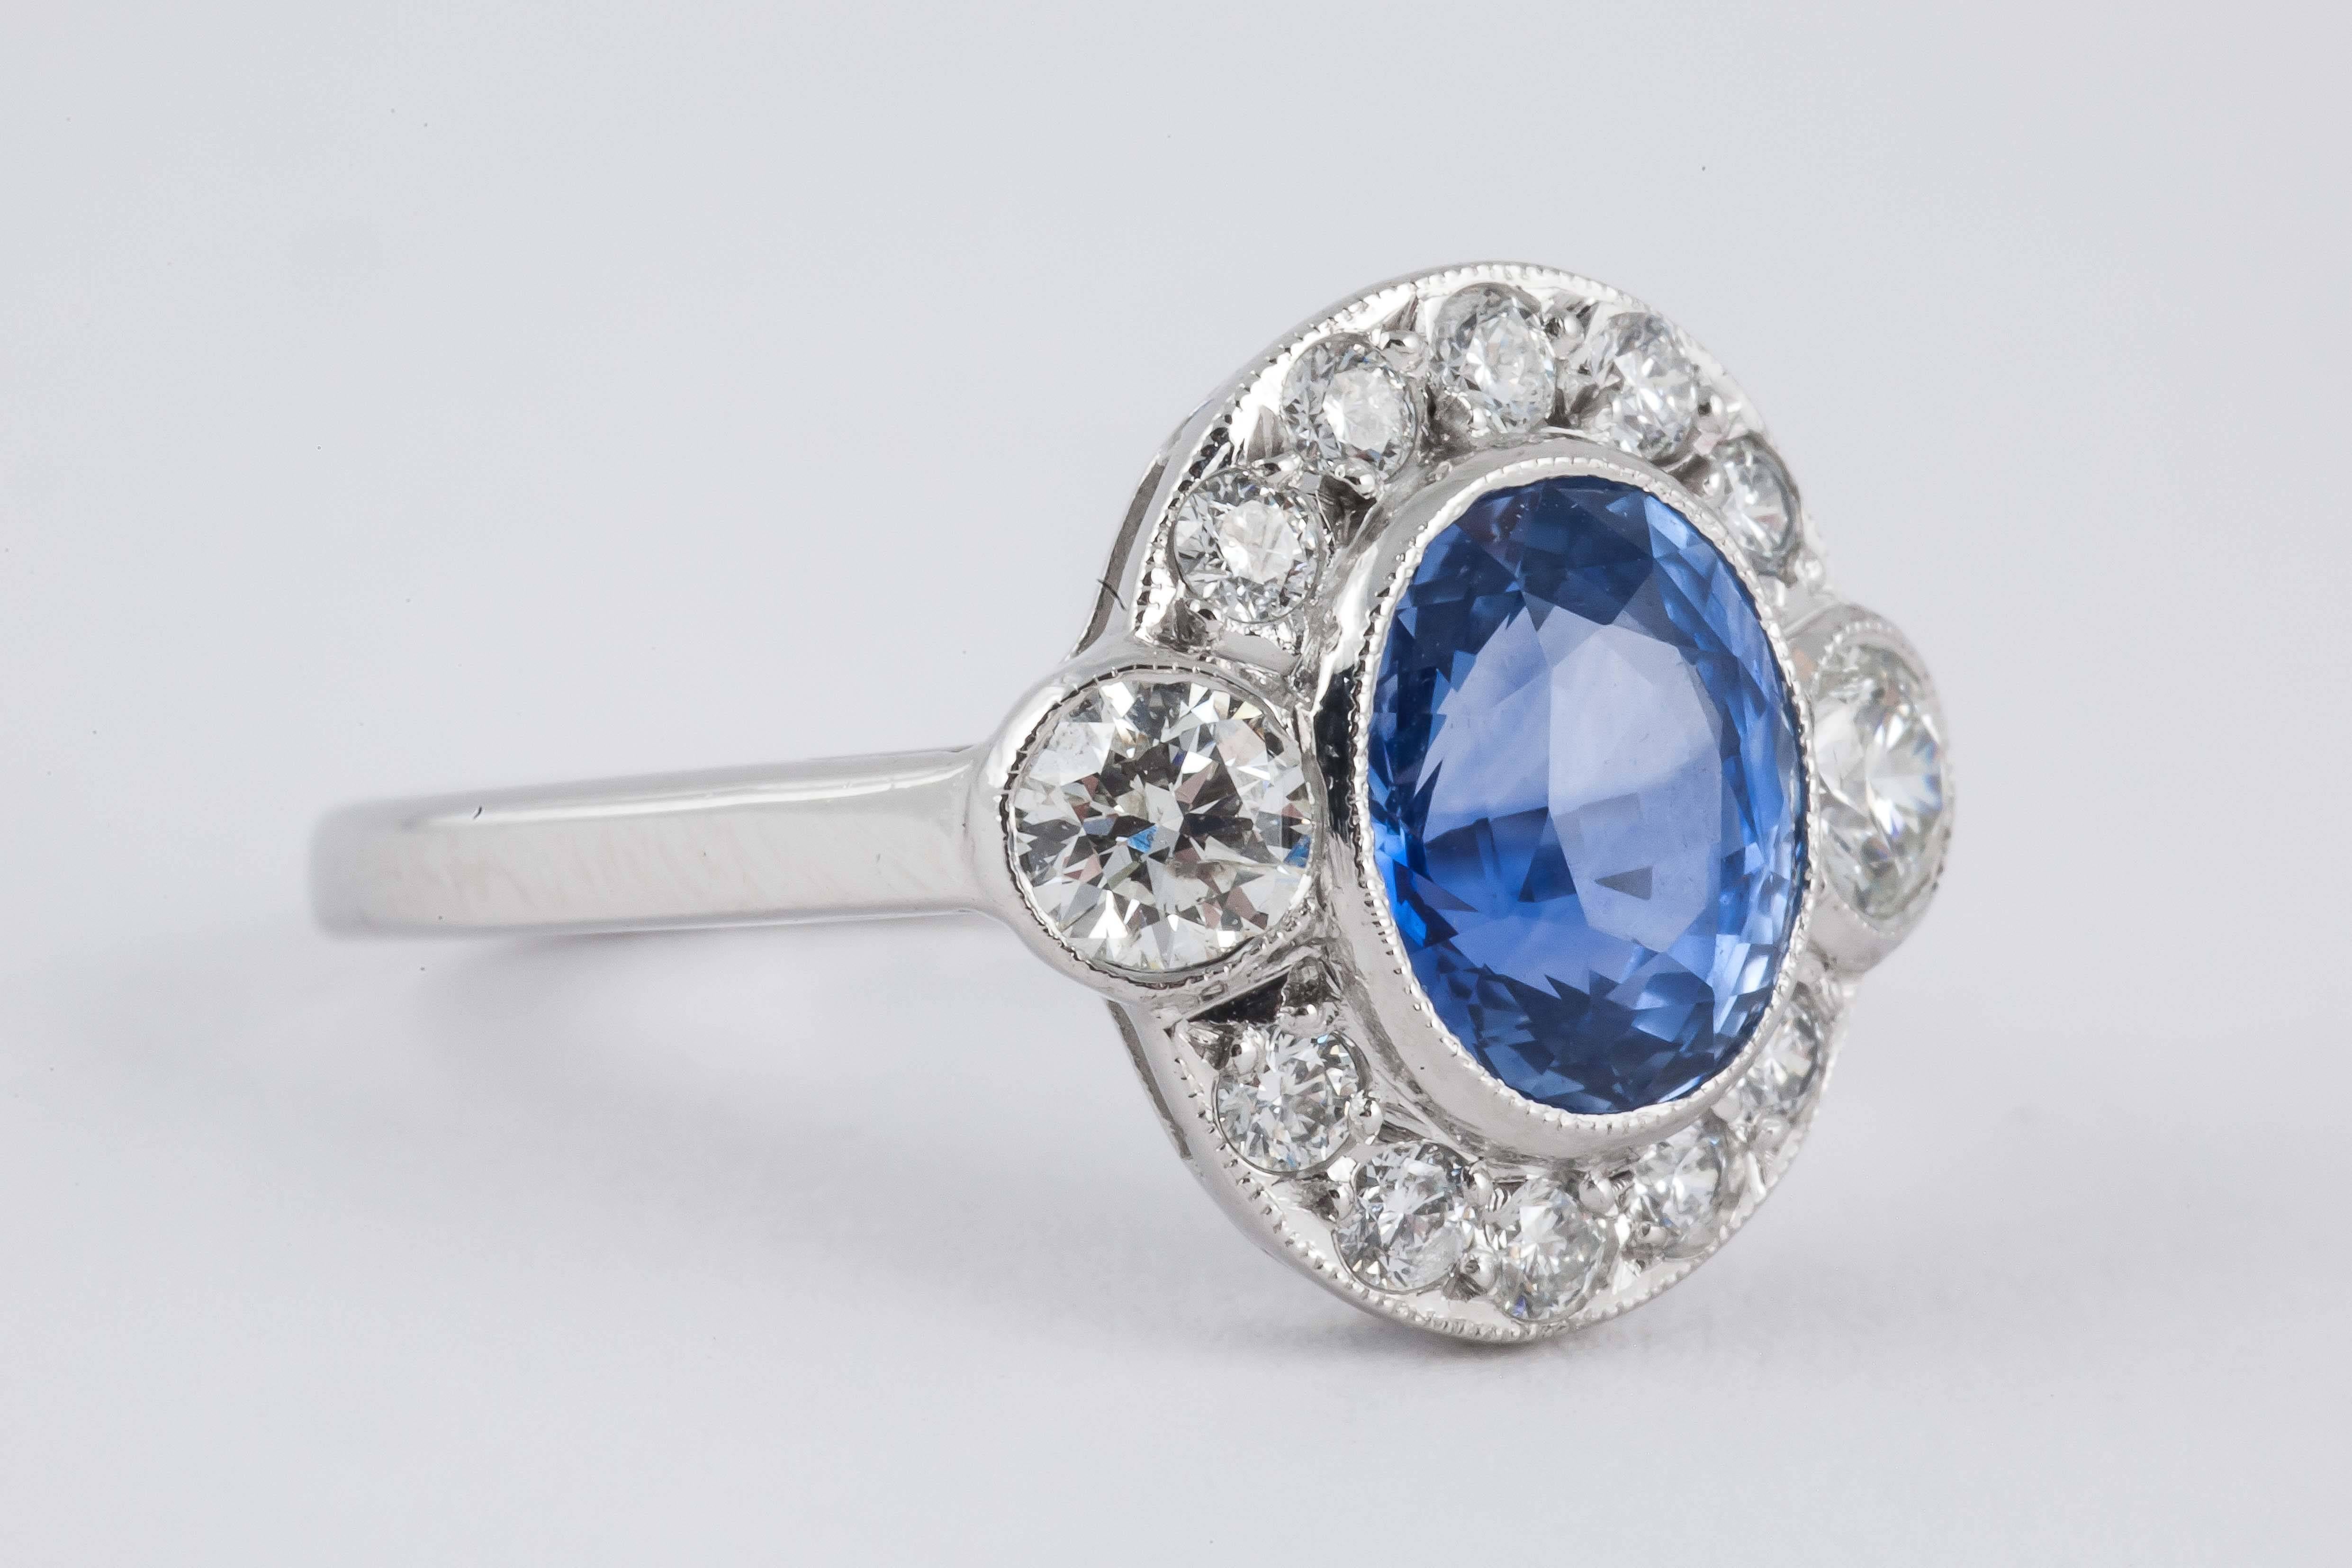 A twelve stone, old brilliant cut diamond cluster ring with a pale Ceylon sapphire centre, mounted in 18 carat golds, 1990